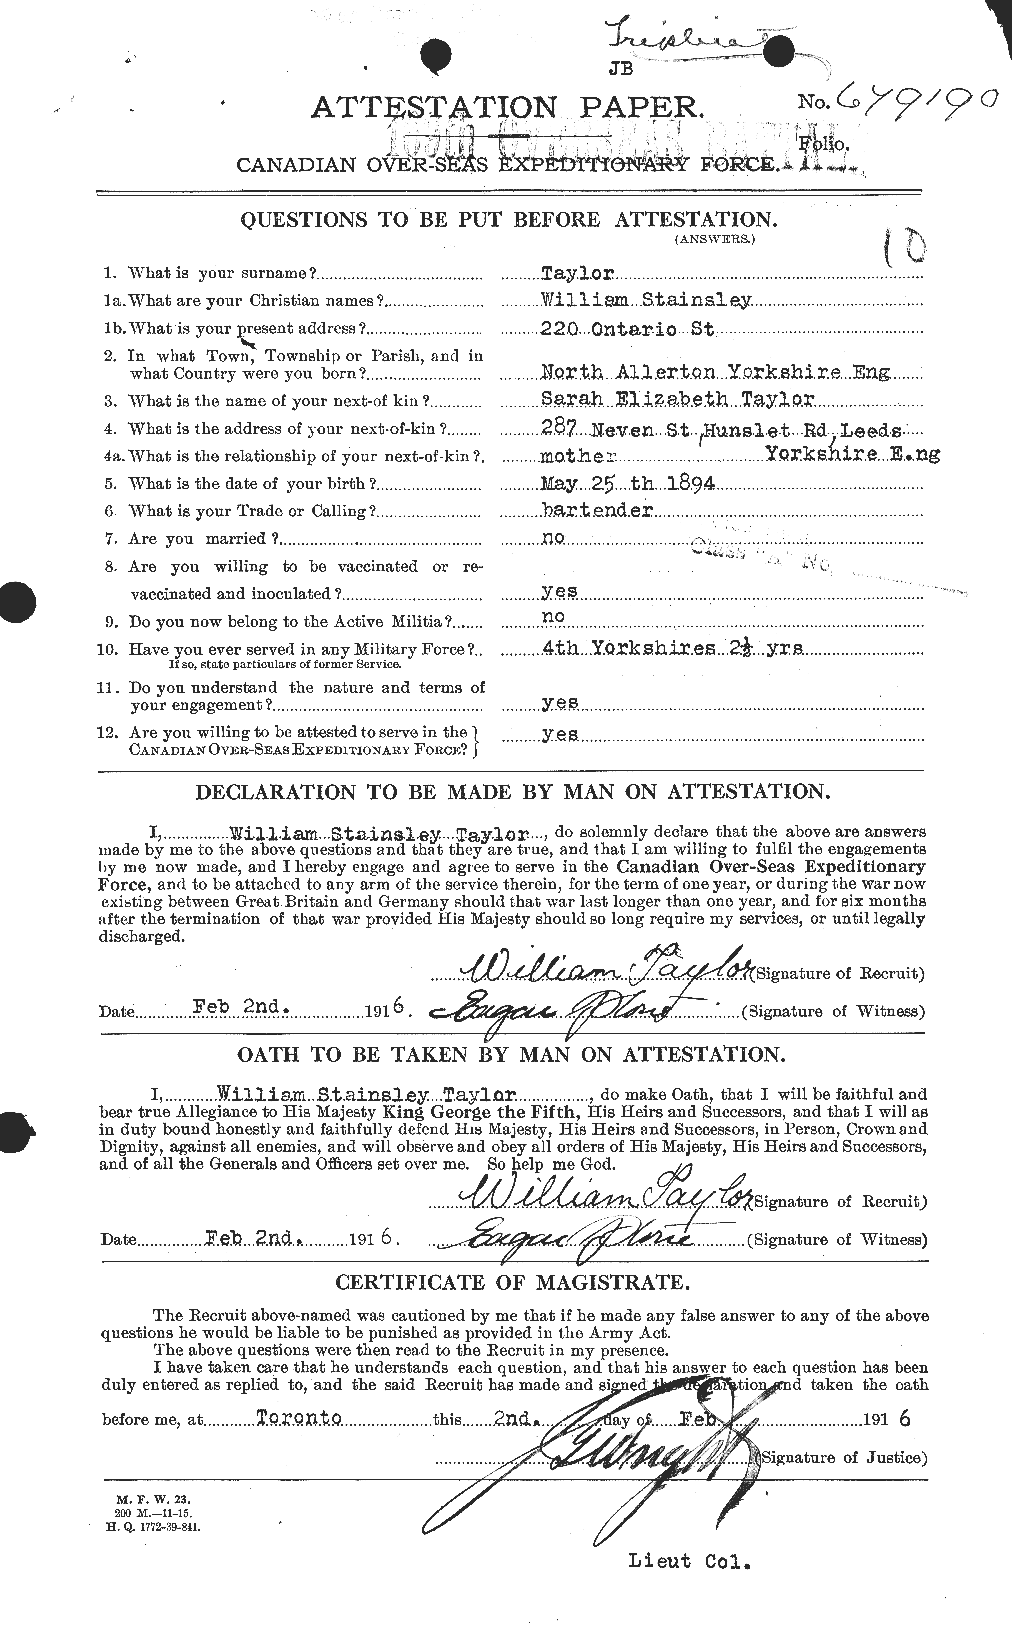 Personnel Records of the First World War - CEF 628349a